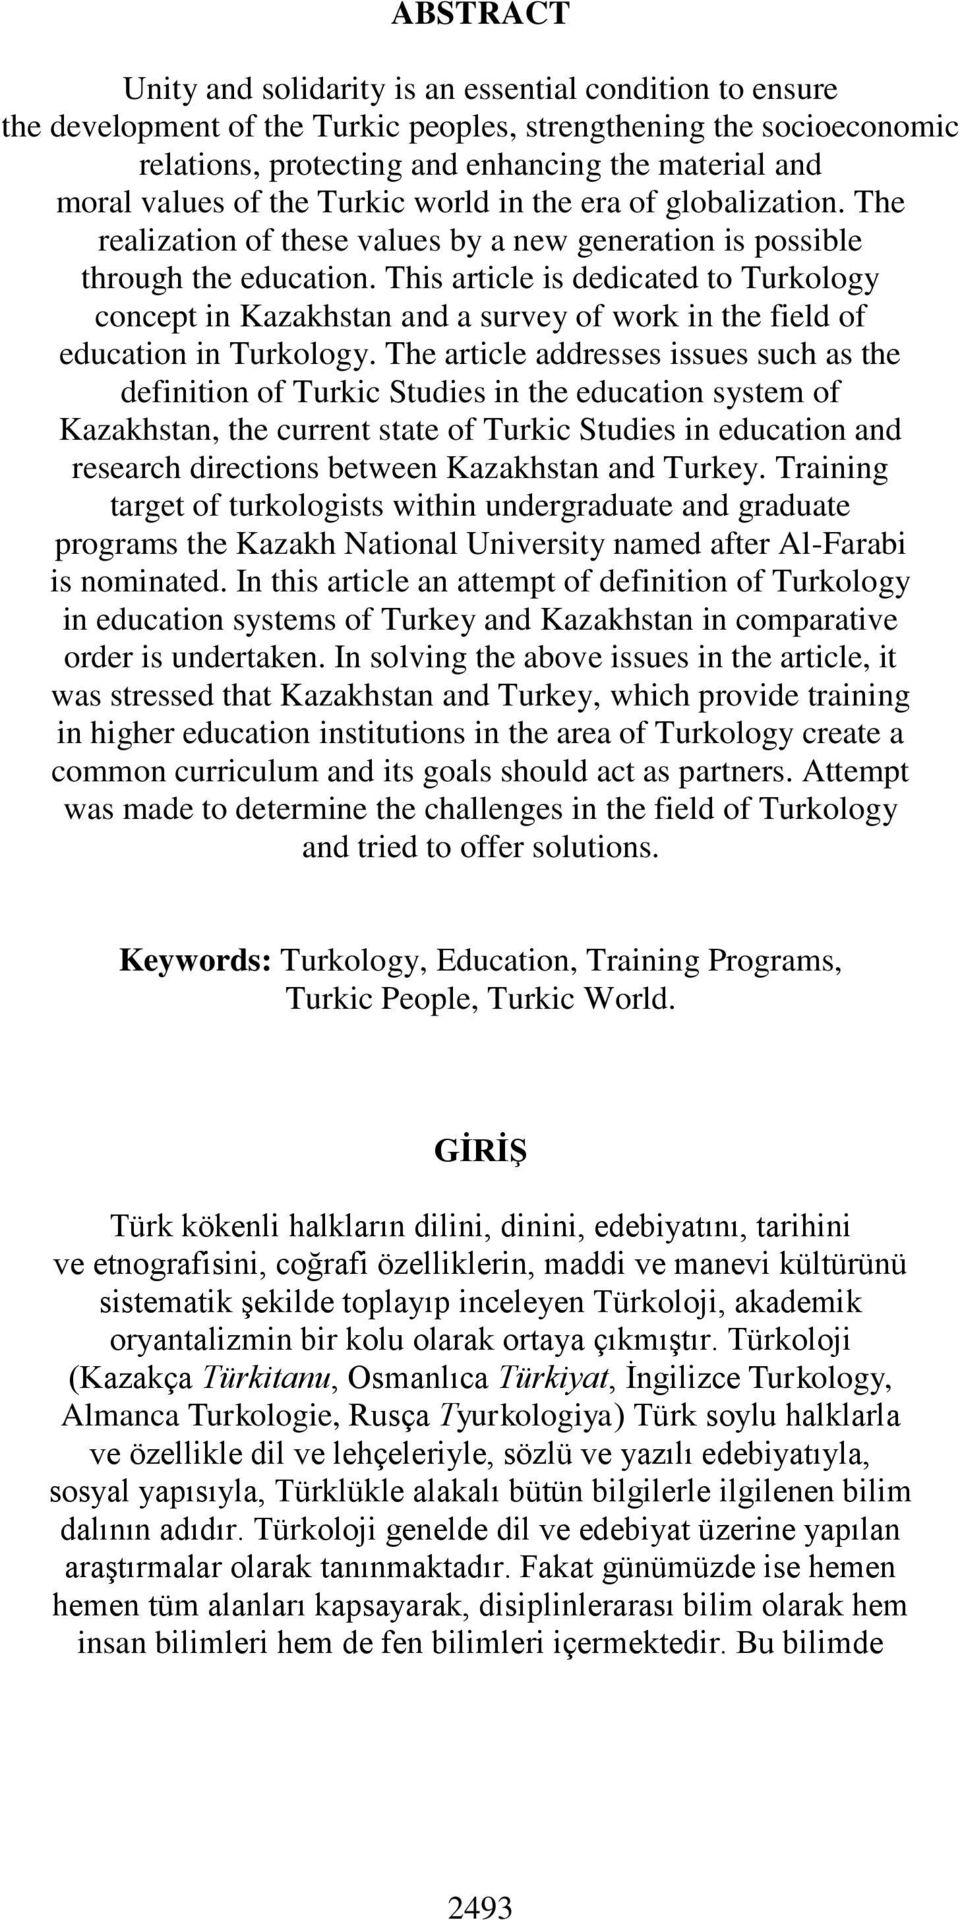 This article is dedicated to Turkology concept in Kazakhstan and a survey of work in the field of education in Turkology.